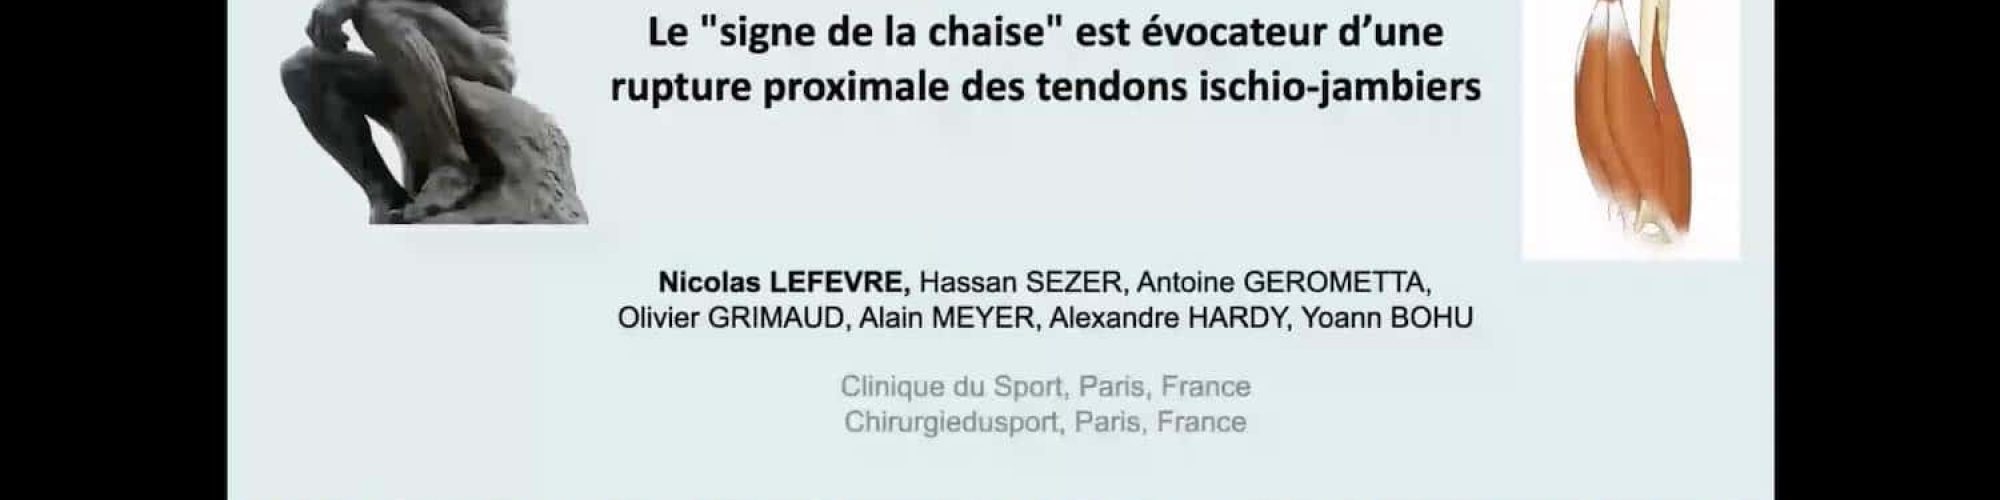 signe-chaise-chirurgie